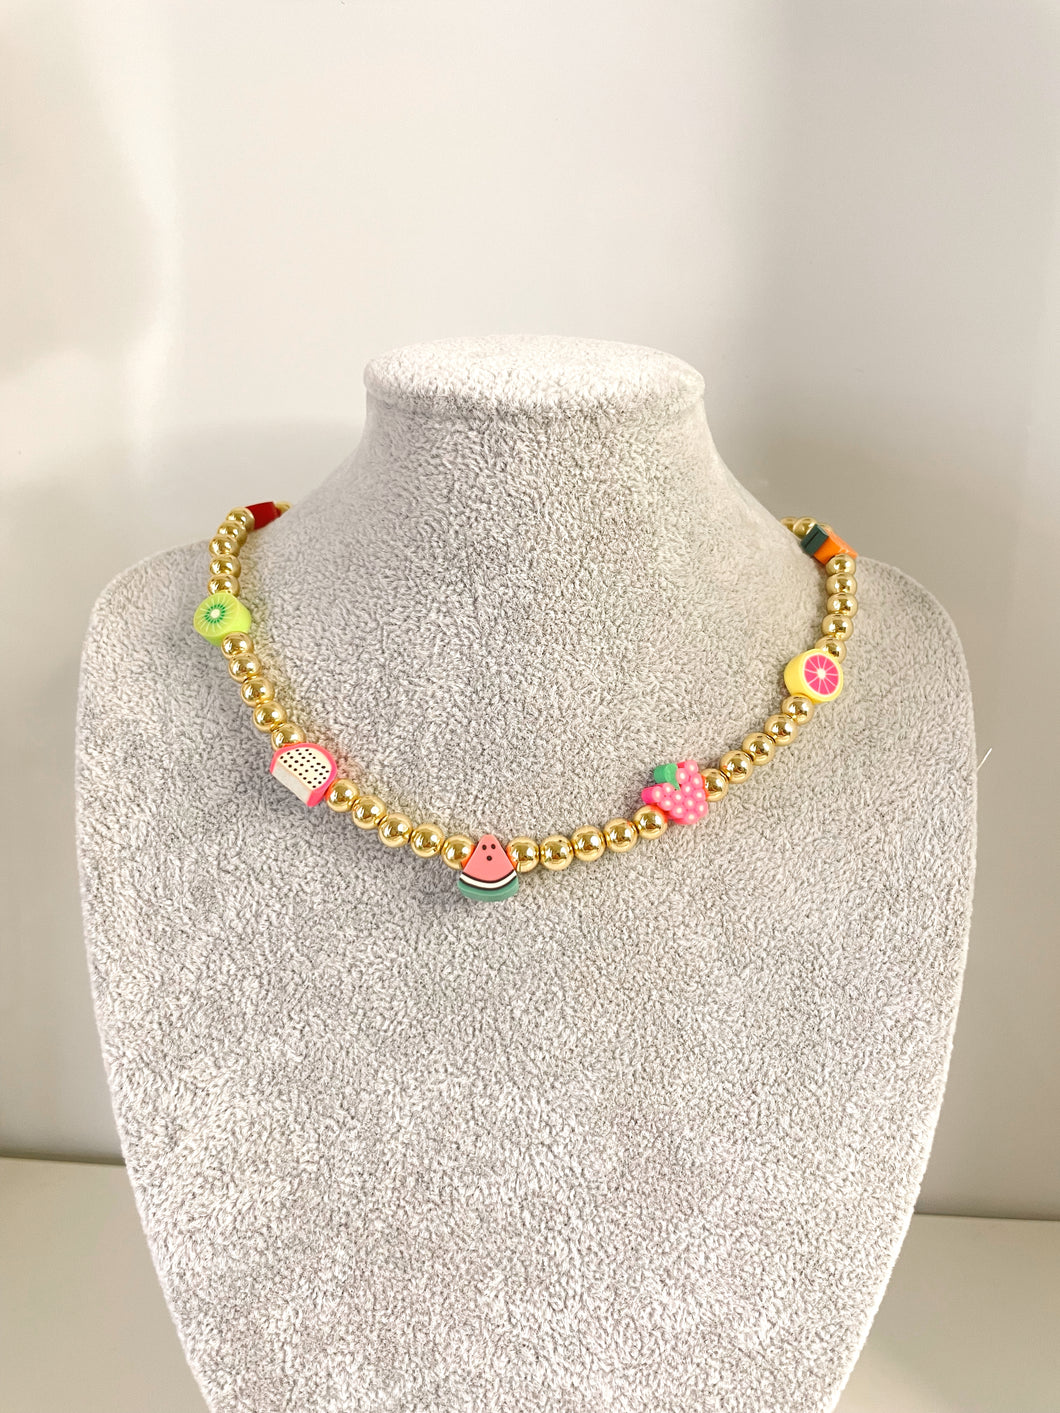 Fruity Necklace